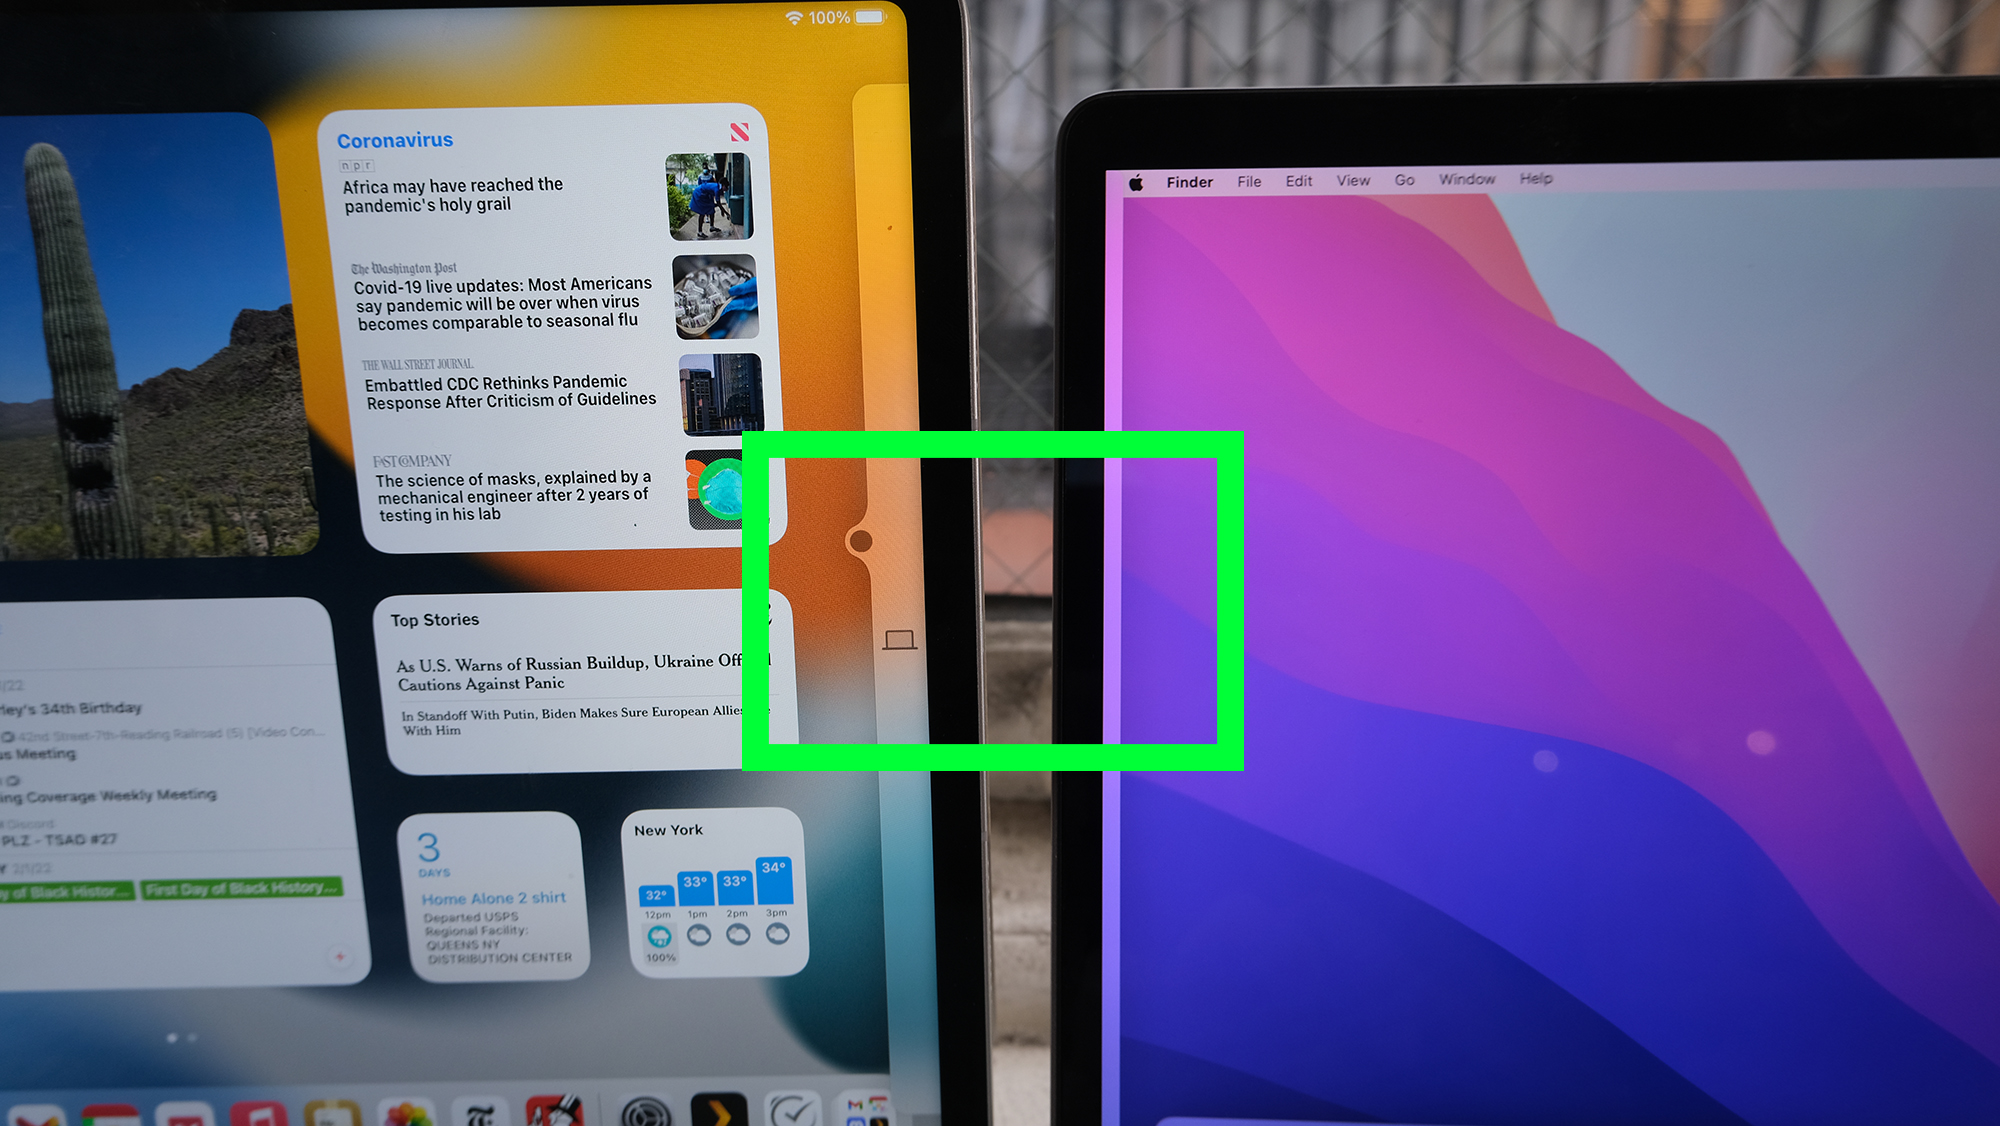 Cursor going from MacBook Pro to iPad Pro using Universal Control